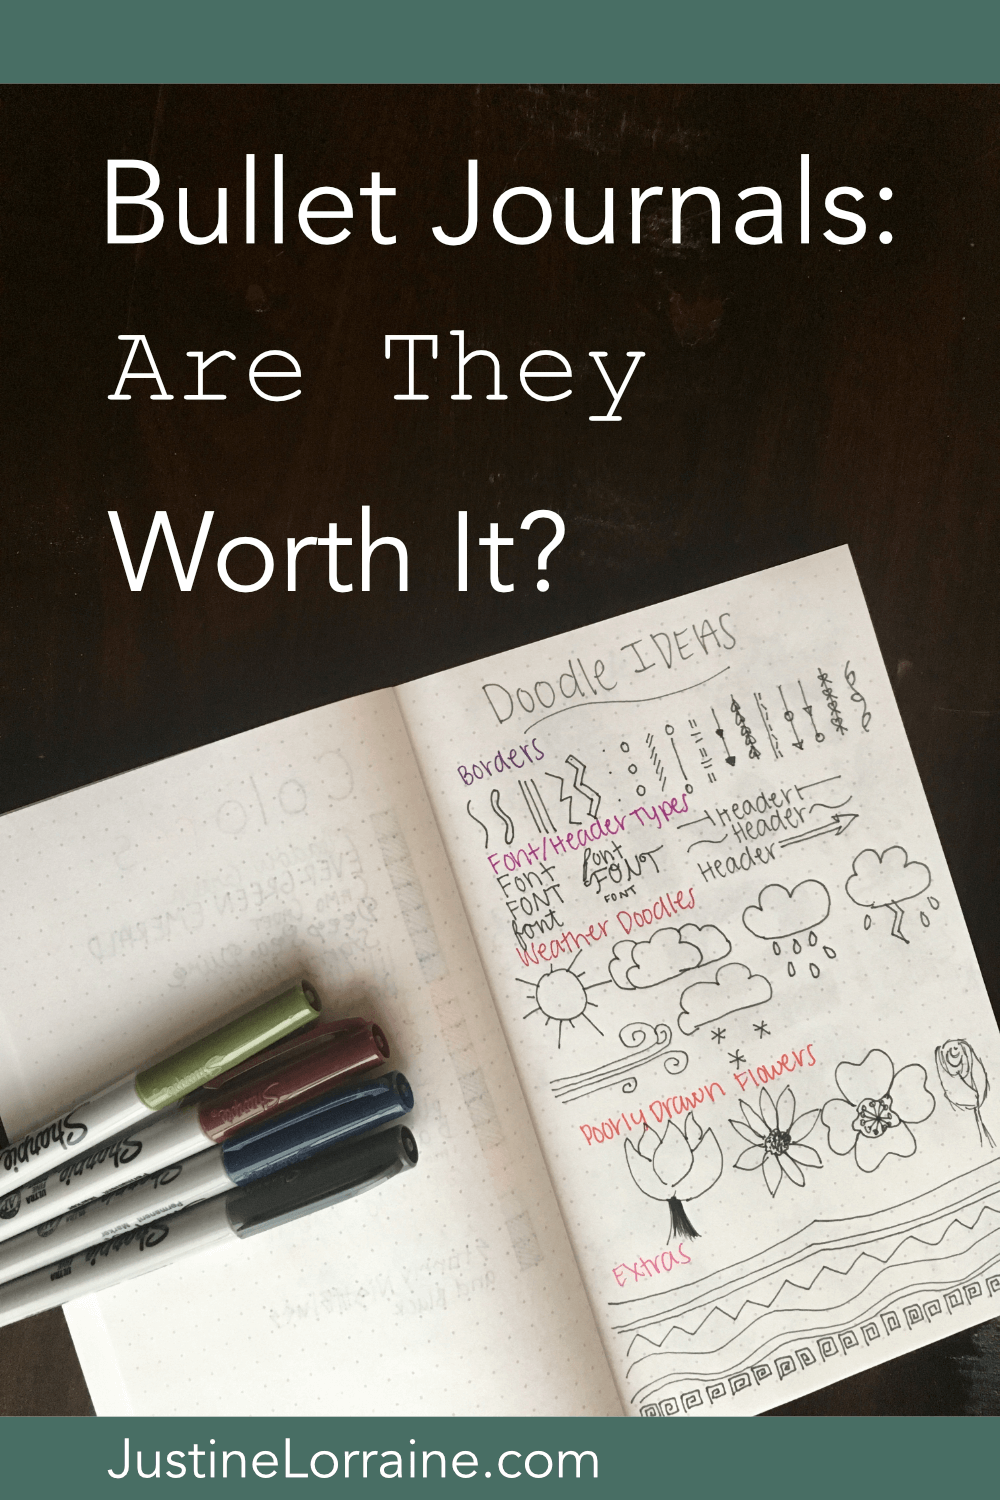 I tried using a Bullet Journal due to their popularity, hoping it would somehow improve my life. However, I don't believe they live up to the hype.